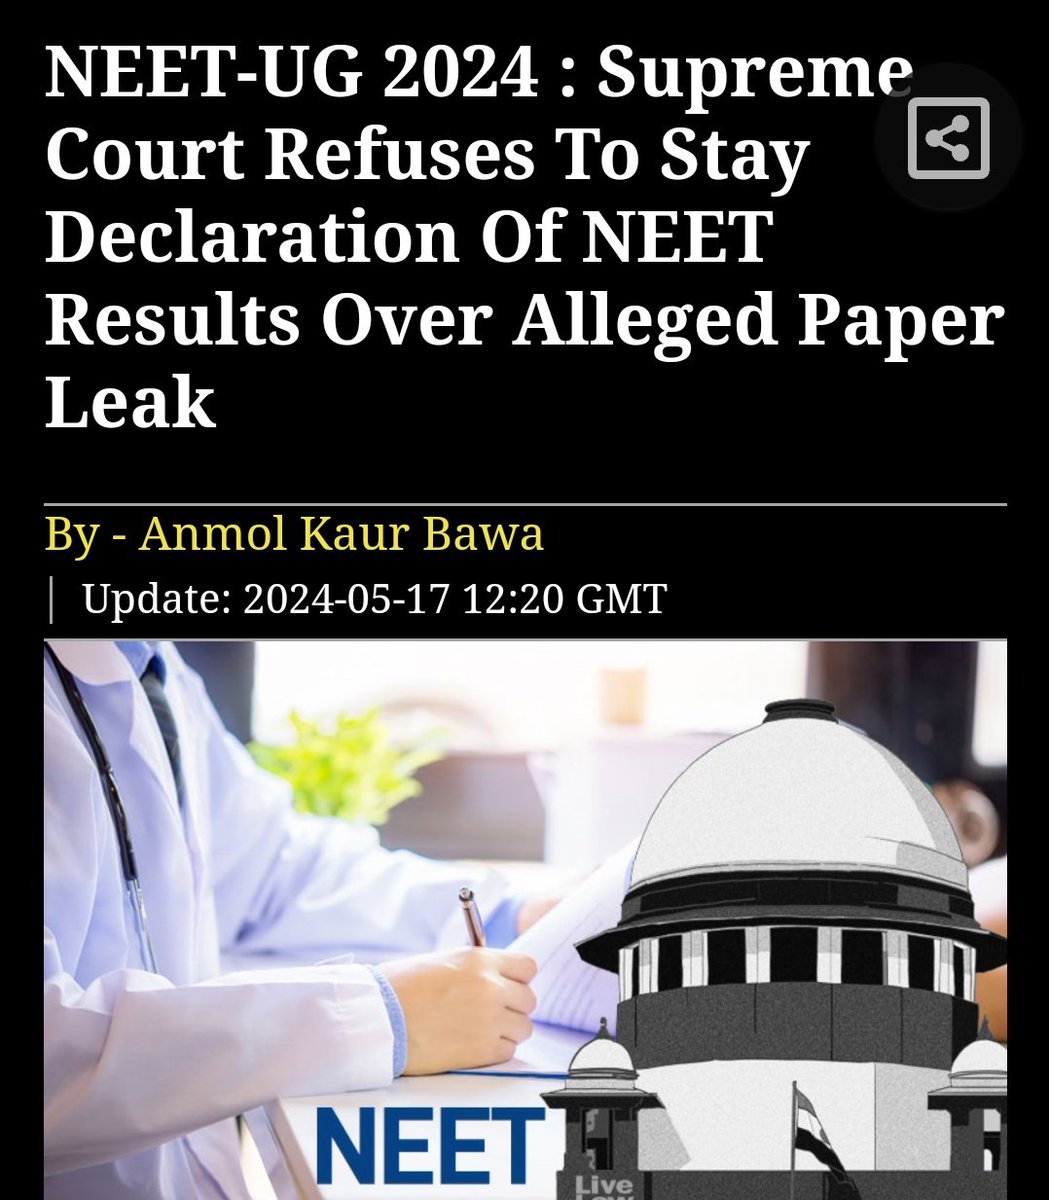 Will the Government Do justice to The Youth Who Are Unhappy Due To The NEET Paper Leak? 

Will NTA Accept or not???? 
Should students get justice or not?
#NEET_PAPER_LEAK #NeetPaperLeak #neet2024 #NEETUG2024 #ReNEET #NEET #Neet_paper_रद्द_करो